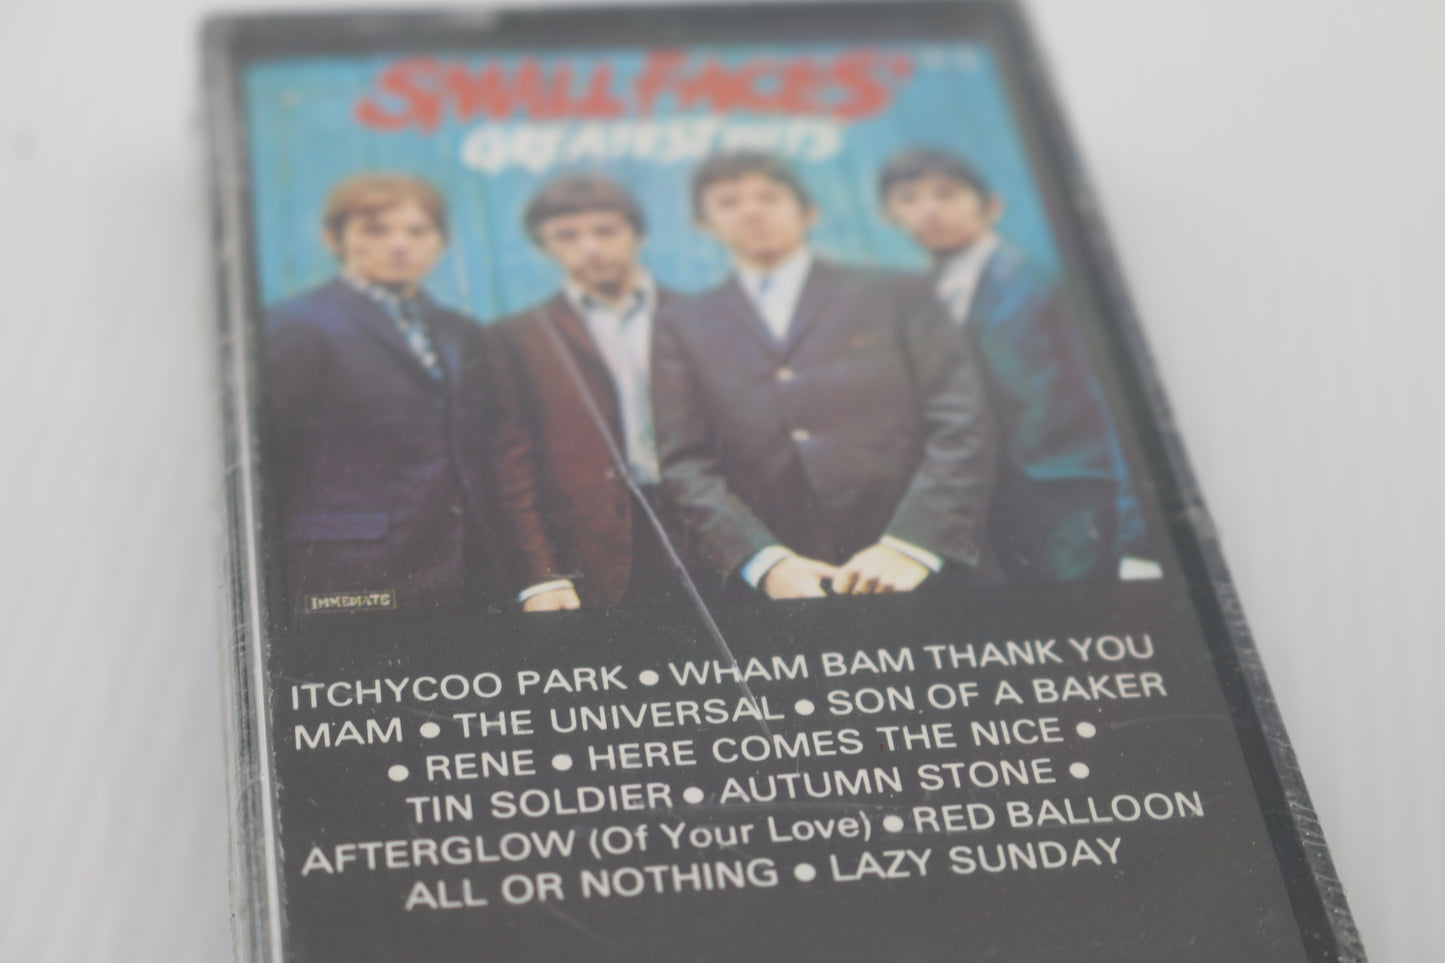 Vintage music  SMALL FACES Greatest Hits Small Faces CASSETTE Tape sealed